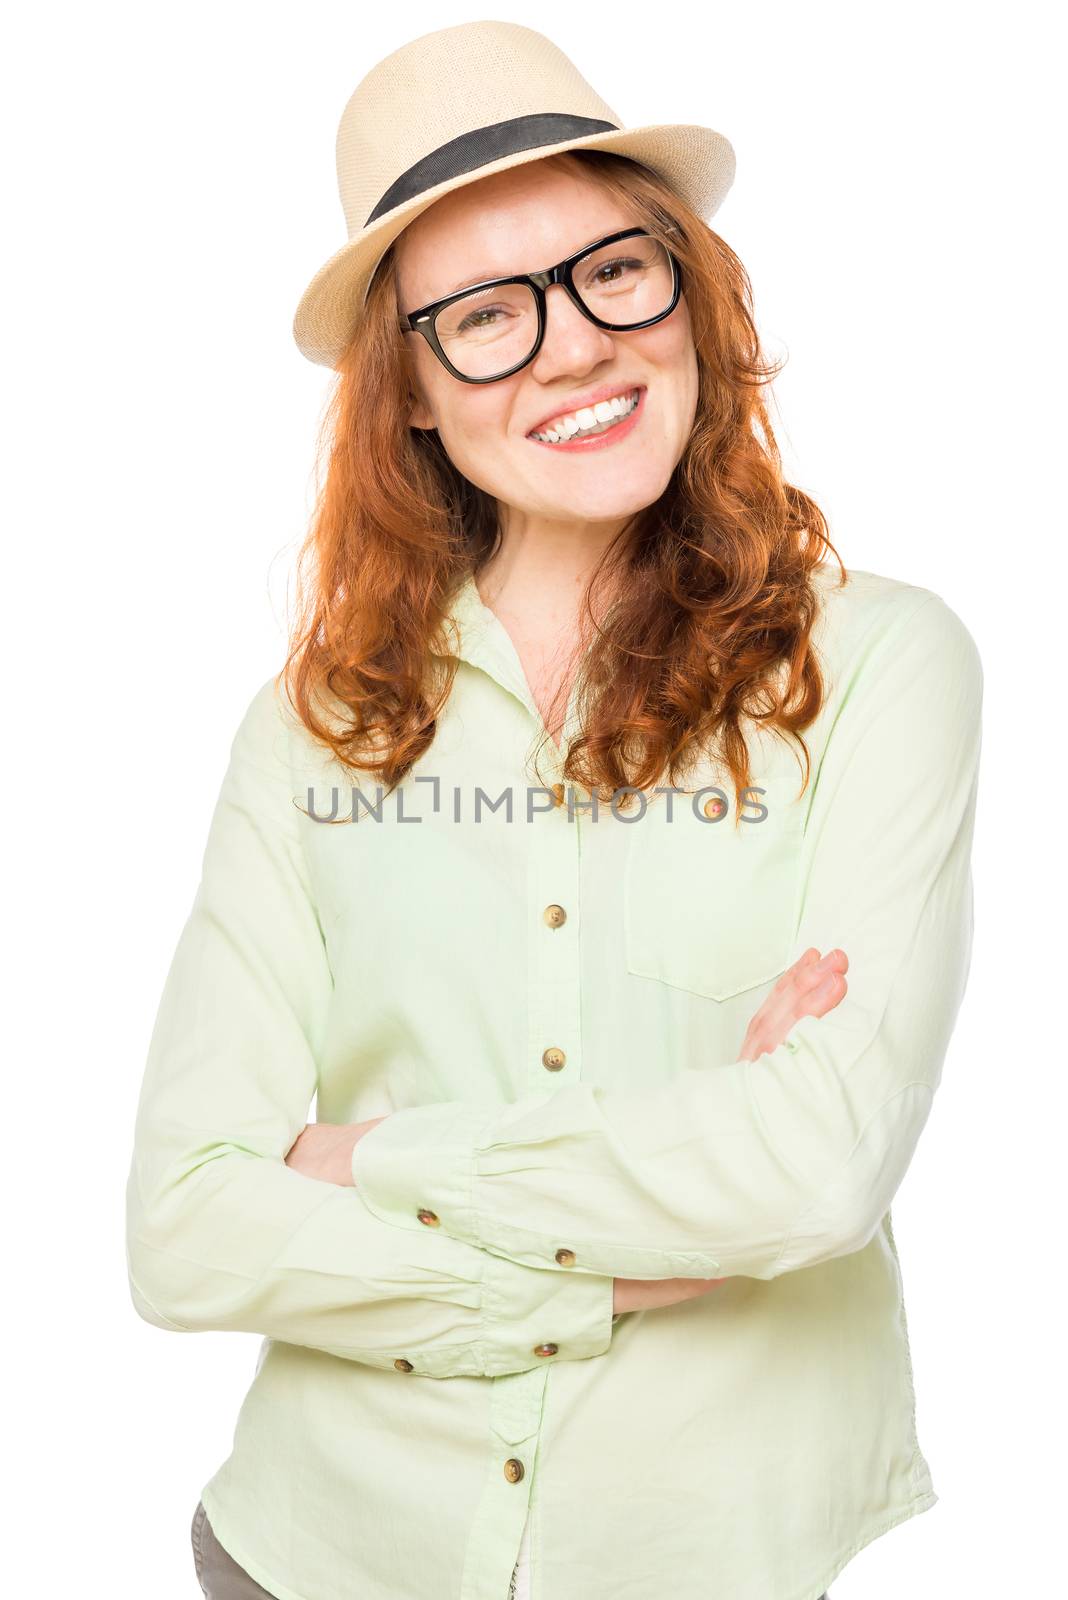 Successful happy woman posing on a white background by kosmsos111